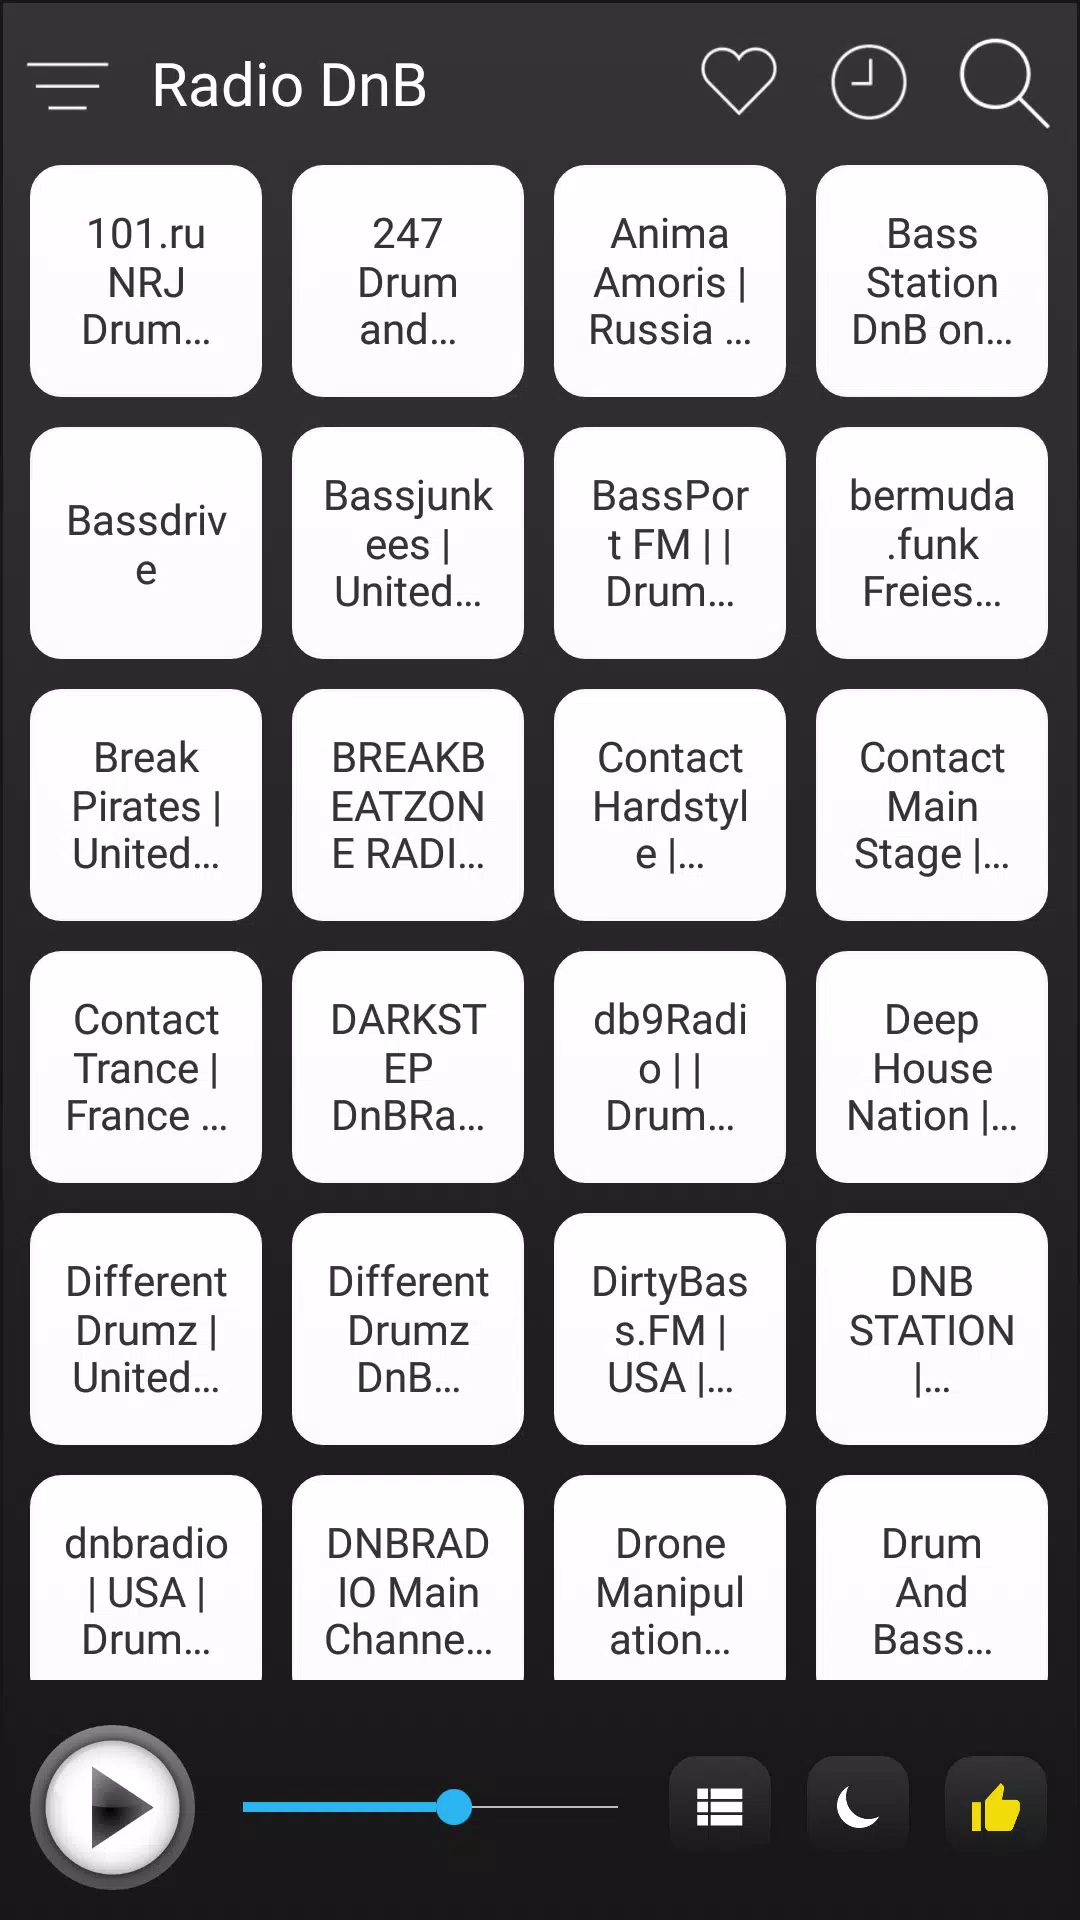 Drum & Bass Radio Station Online - DnB FM AM Music for Android - APK  Download